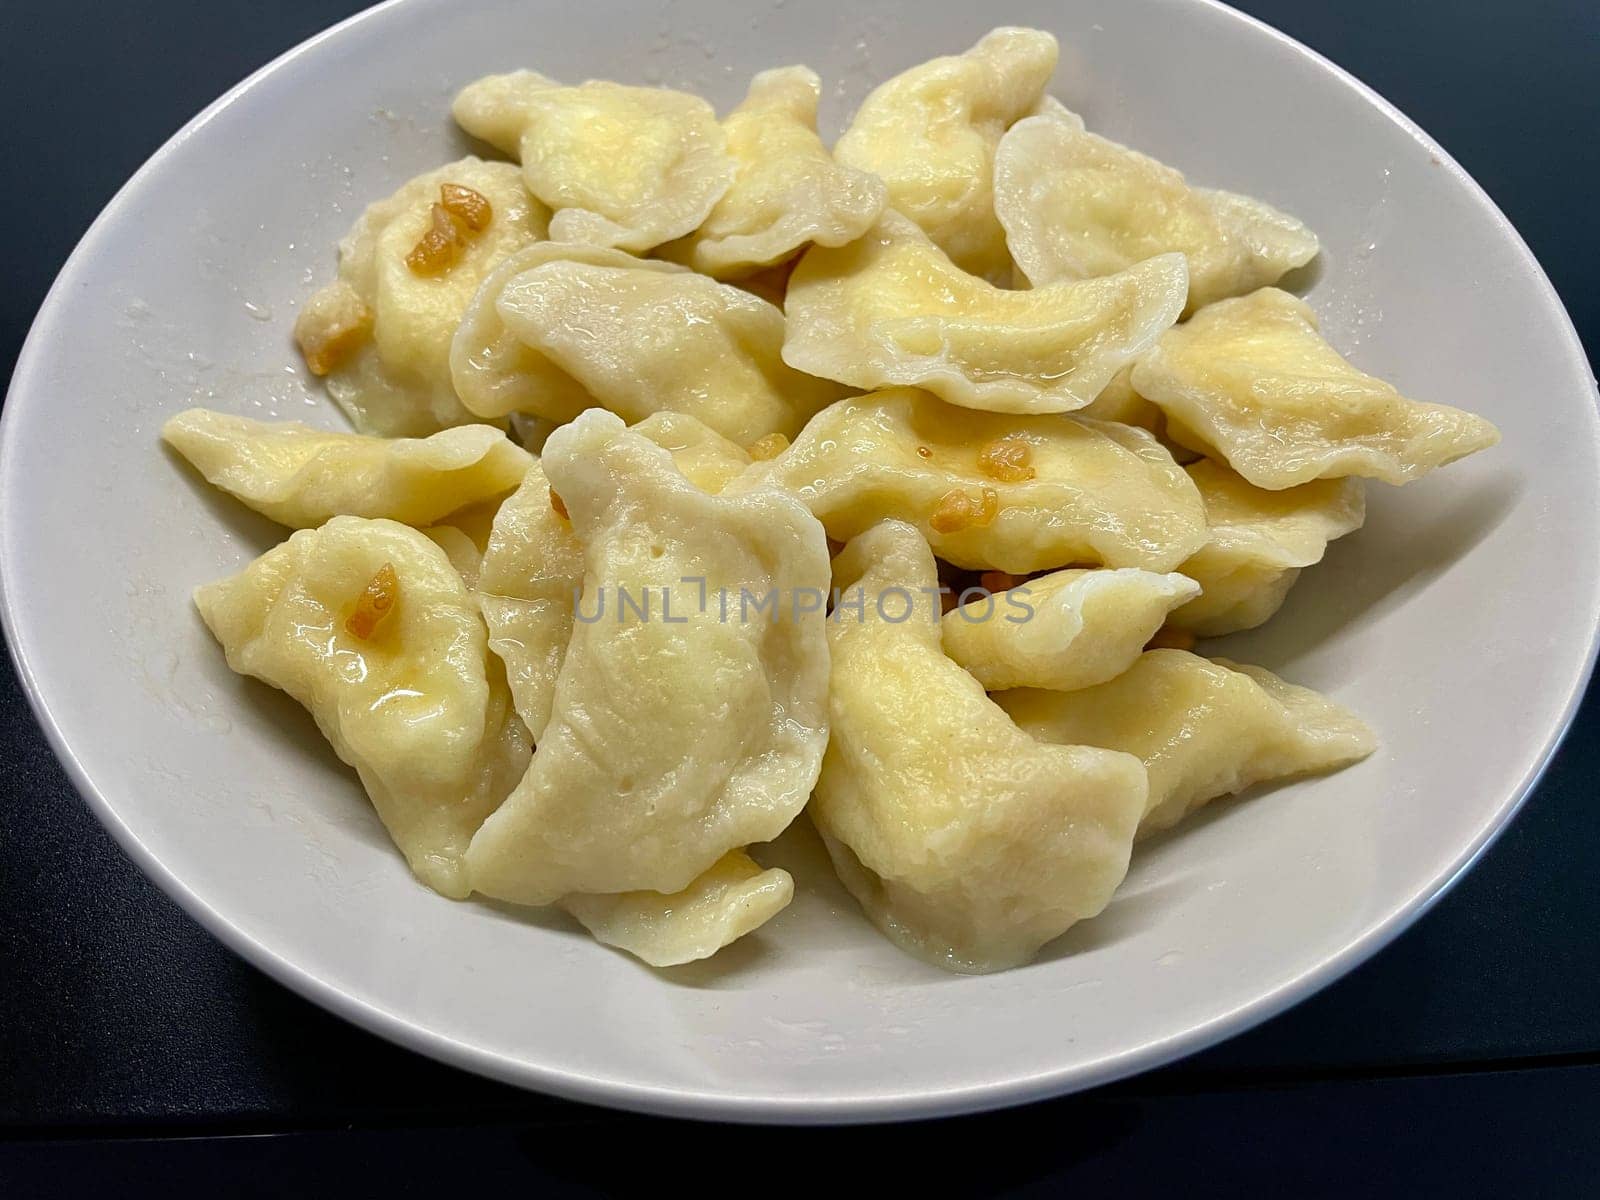 Dumplings with cheese on a gray plate. High quality photo